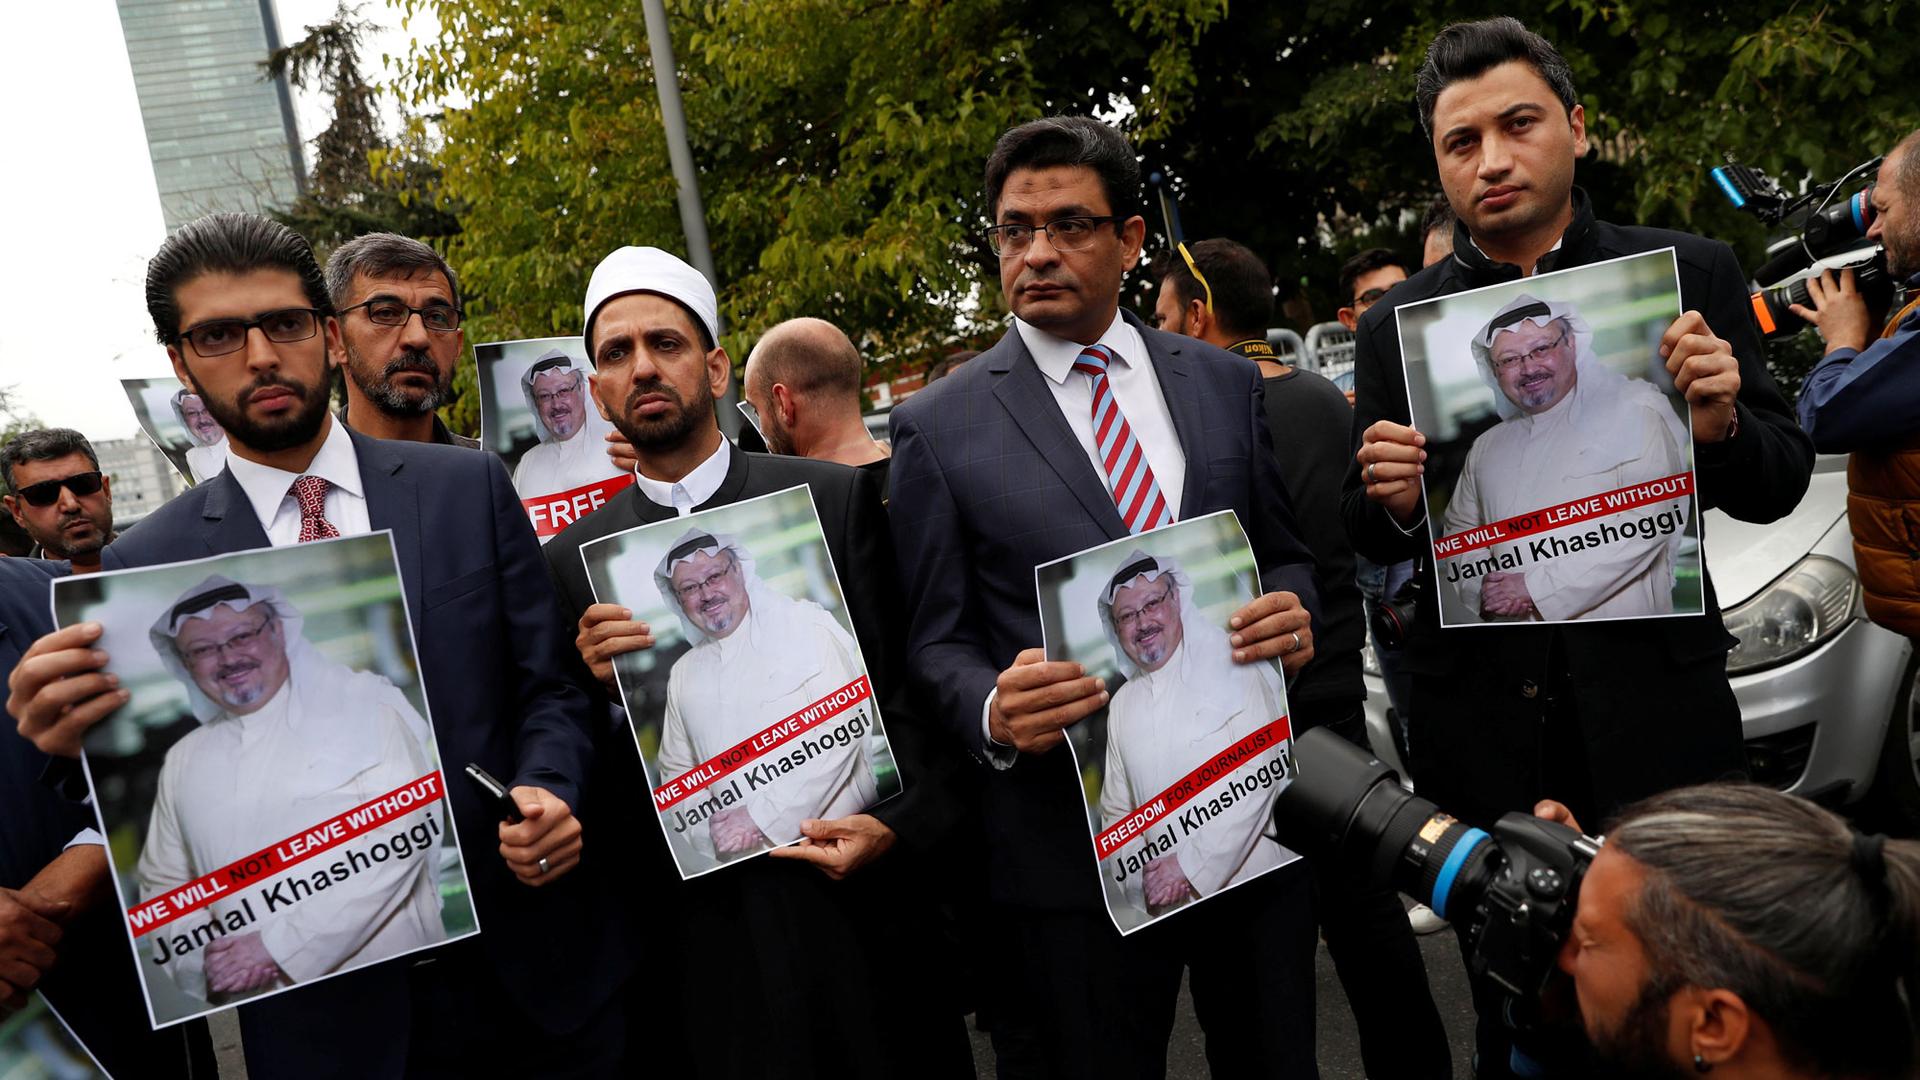 Four men wearing suits stand abreast holding posters of Saudi journalist Jamal Khashoggi's picture.